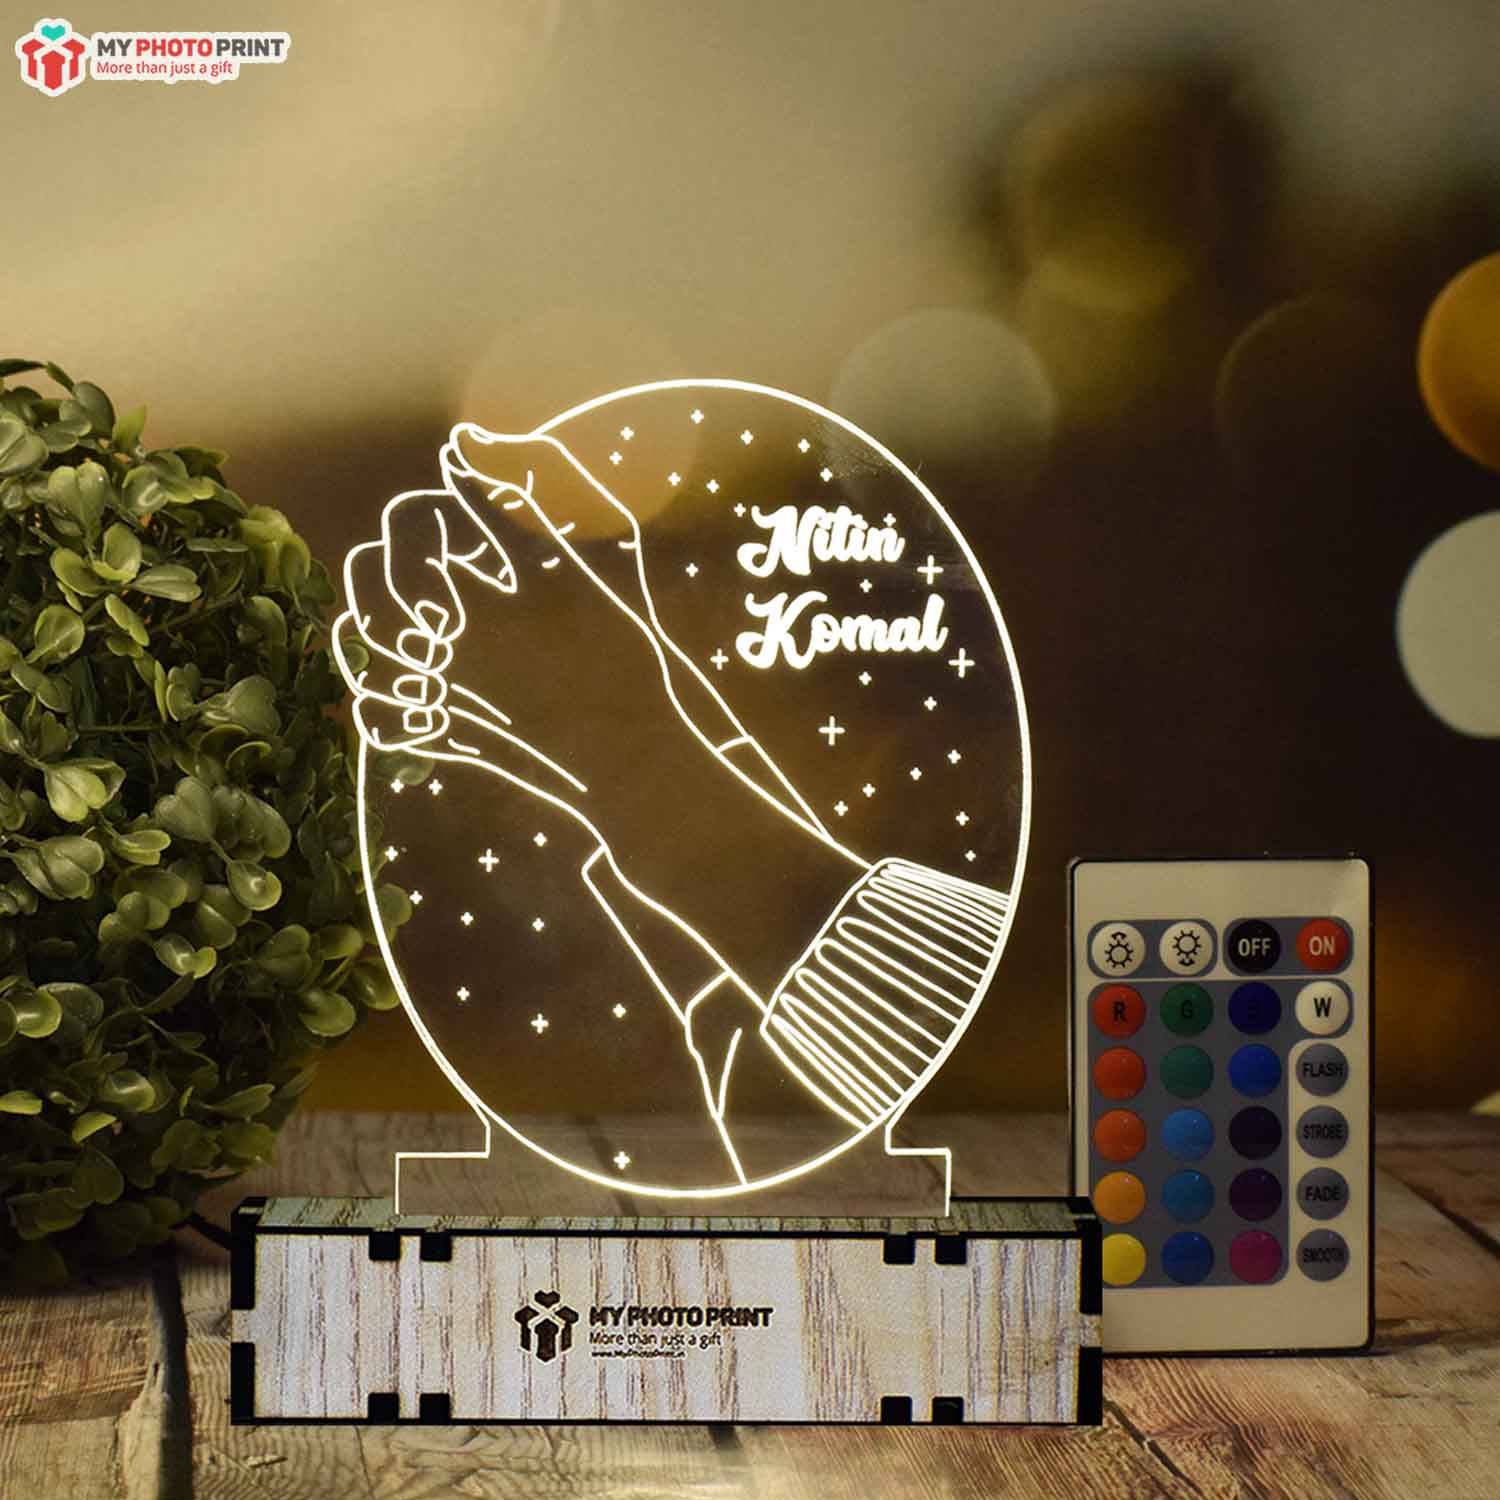 Personalized Couple Hands Acrylic 3D illusion LED Lamp with Color Changing Led and Remote#1388